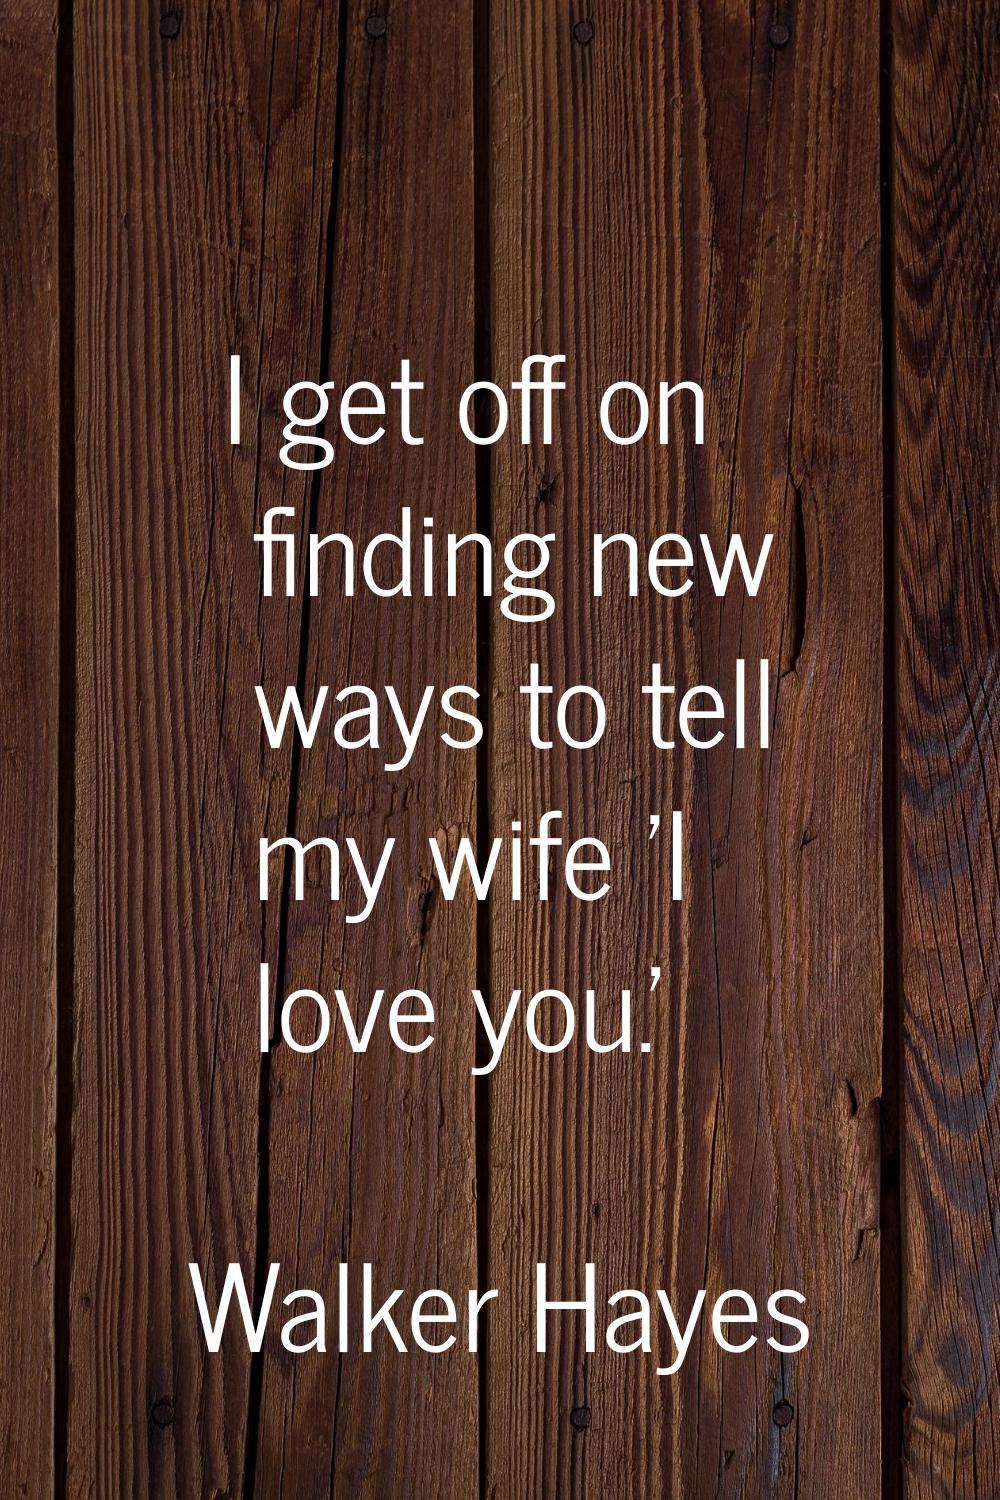 I get off on finding new ways to tell my wife 'I love you.'